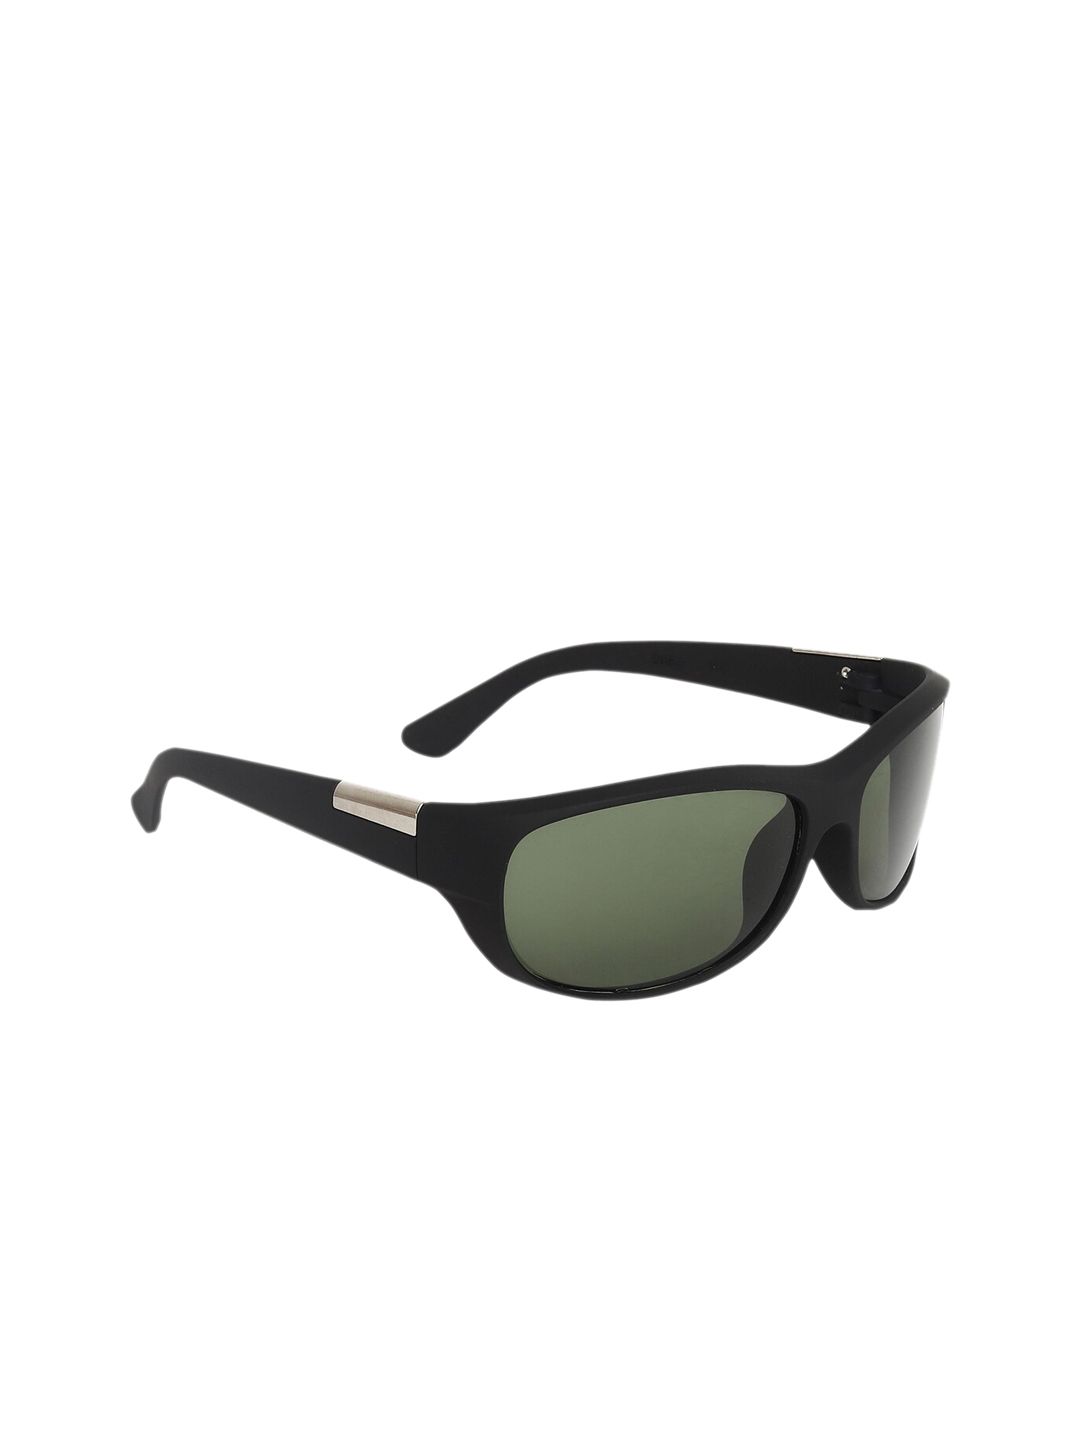 CRIBA Green UV Protected Lens Oversized Sunglass 2053_01 Price in India